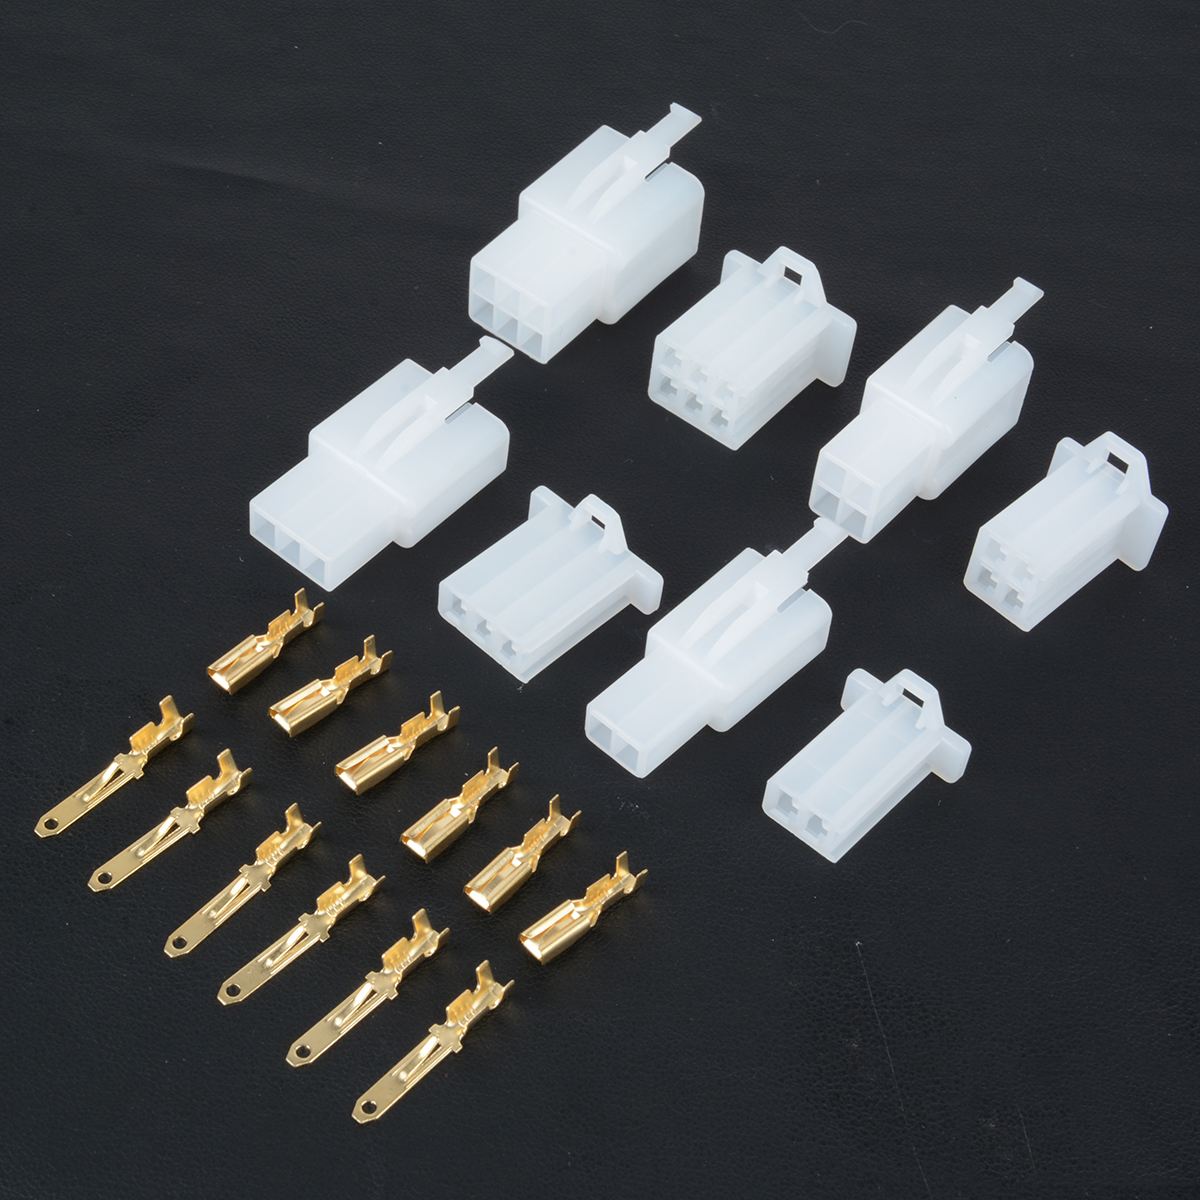 AOQDQDQDreg-40-Set-Practical-Auto-Electrical-2-3-4-6-Pin-28-mm-Wire-Terminal-Connector-with-Fixed-Ho-1811582-4